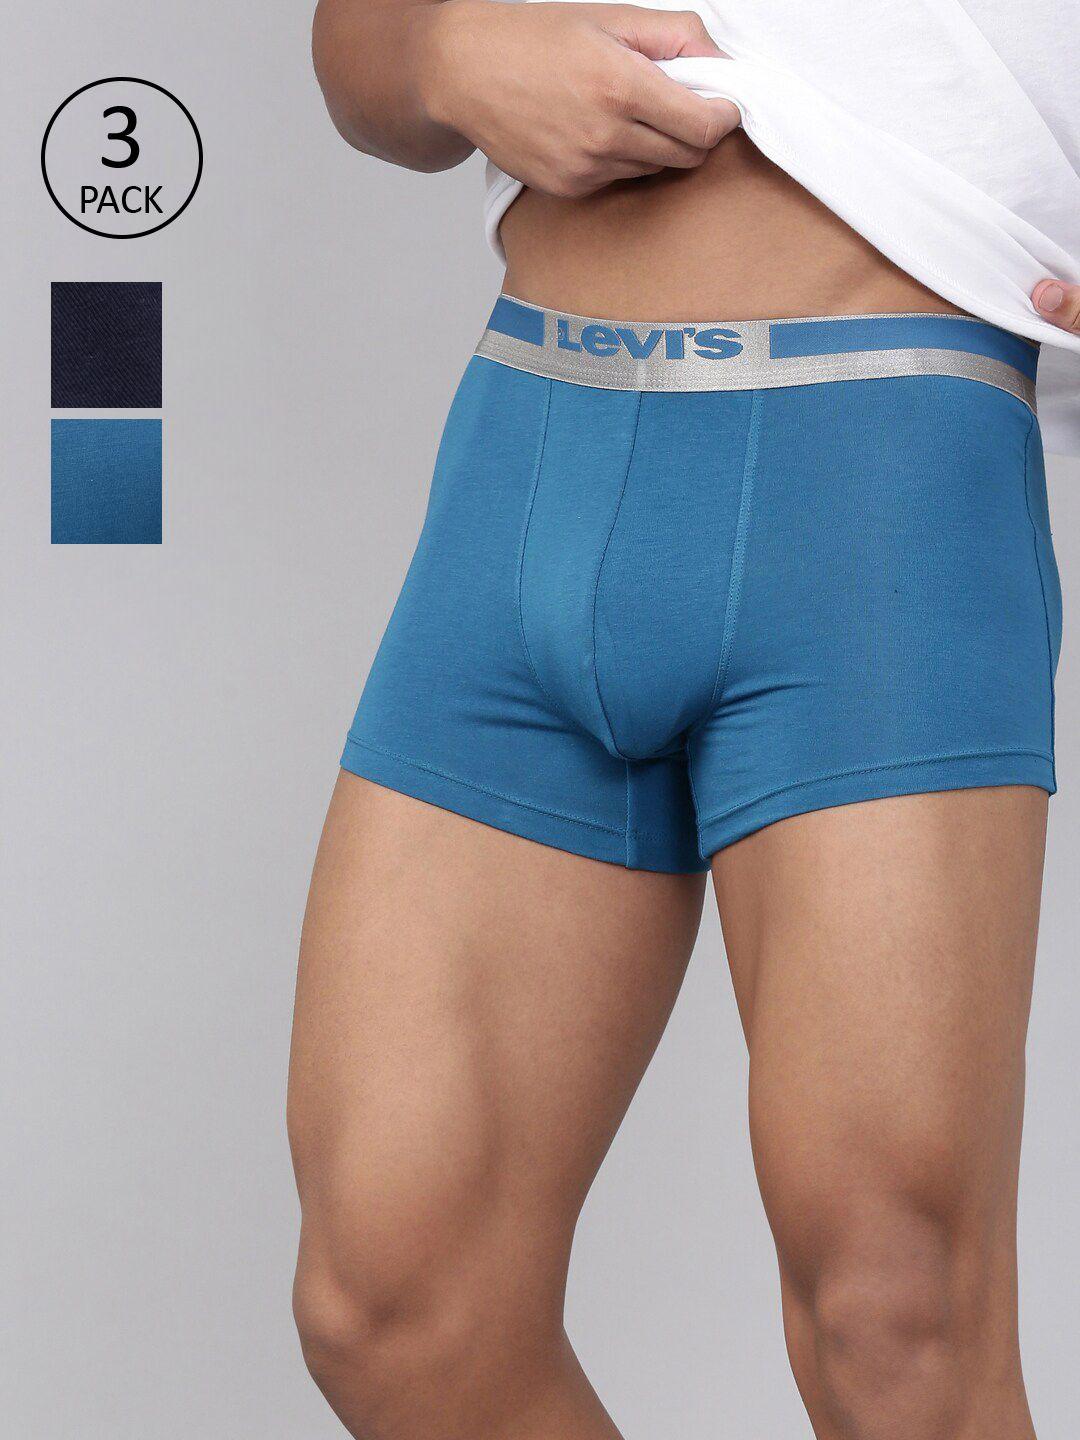 levis men pack of 3 assorted smartskin technology cotton trunks with tag free comfort-030